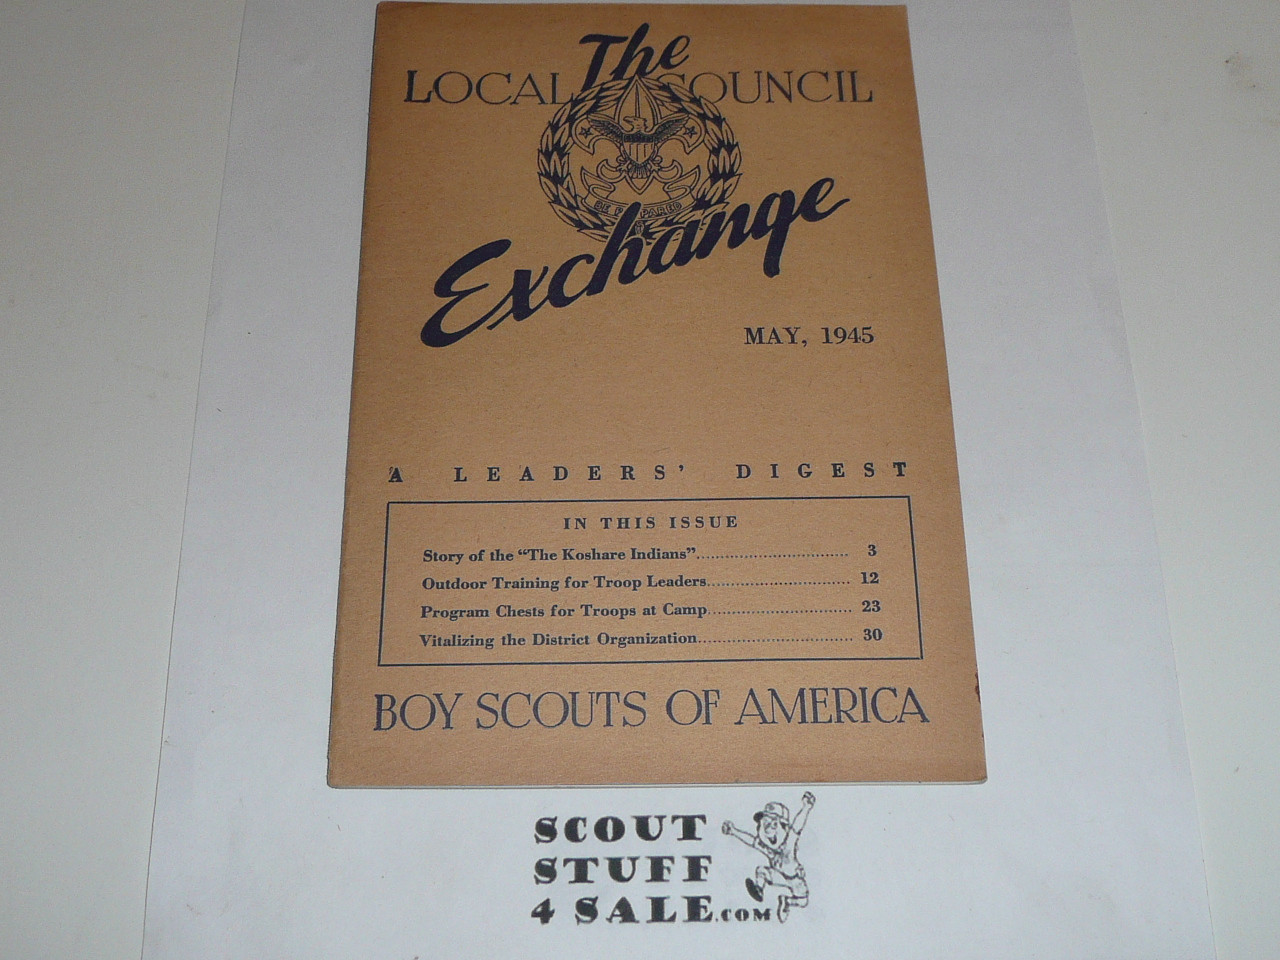 1945 (May) The Local Council Exchange, A leaders' Digest